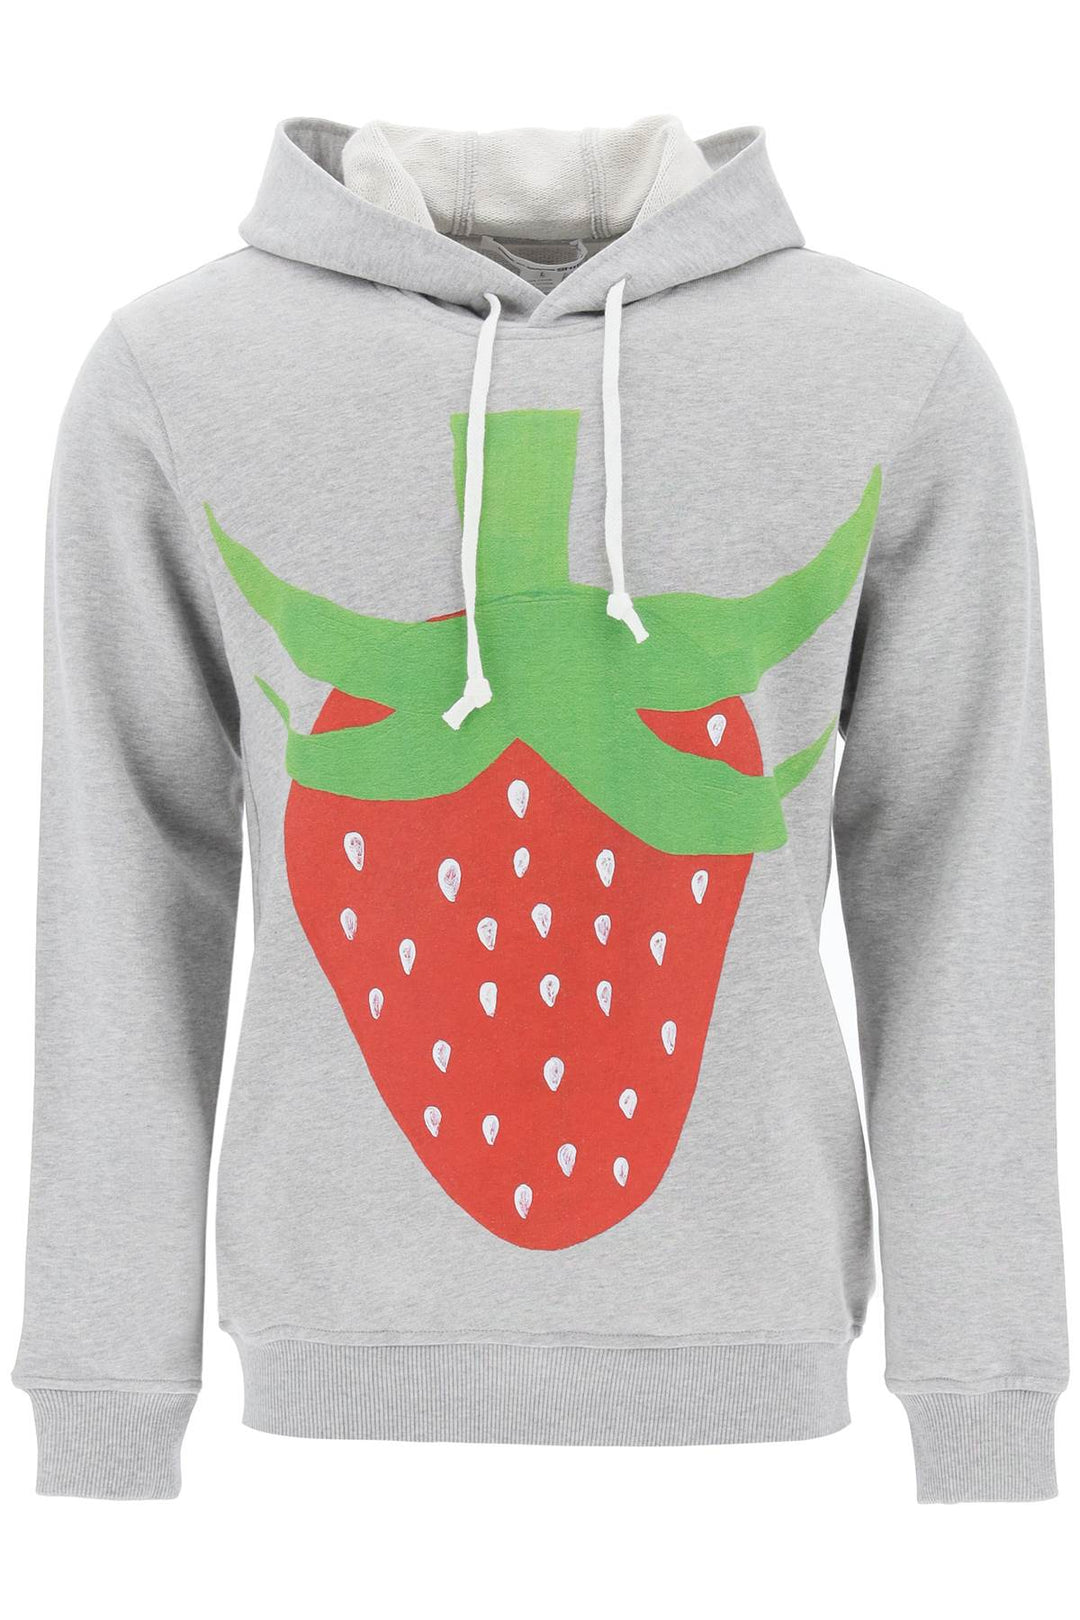 Comme des garcons shirt strawberry printed hoodie-0